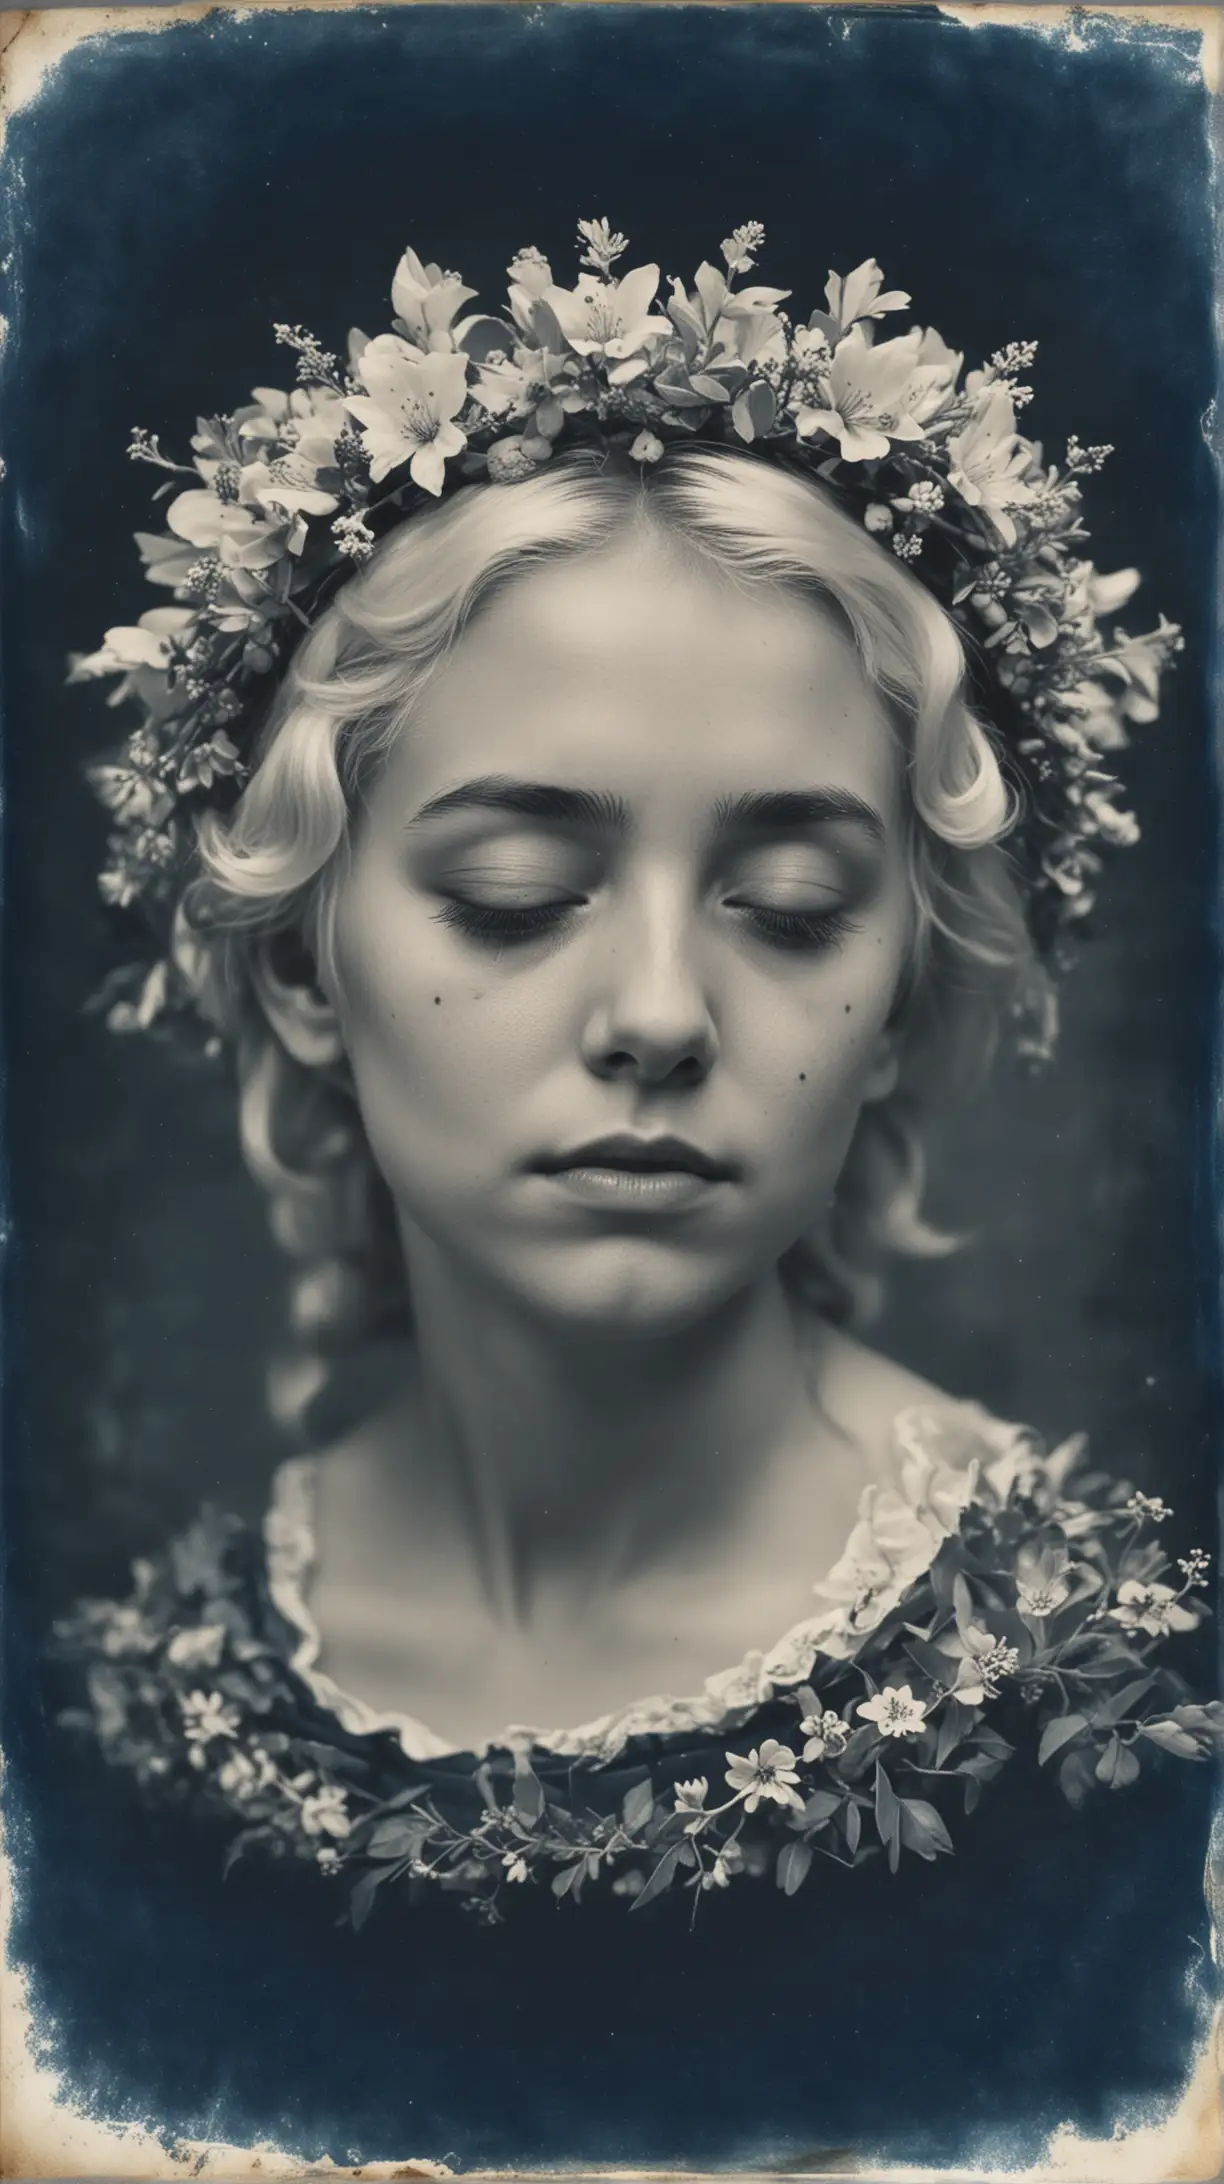 A cyanotype daguerreotype of young woman with white hair wearing a wreath of flowers on her head, deep in thought with eyes closed , facing front onto the camera, 